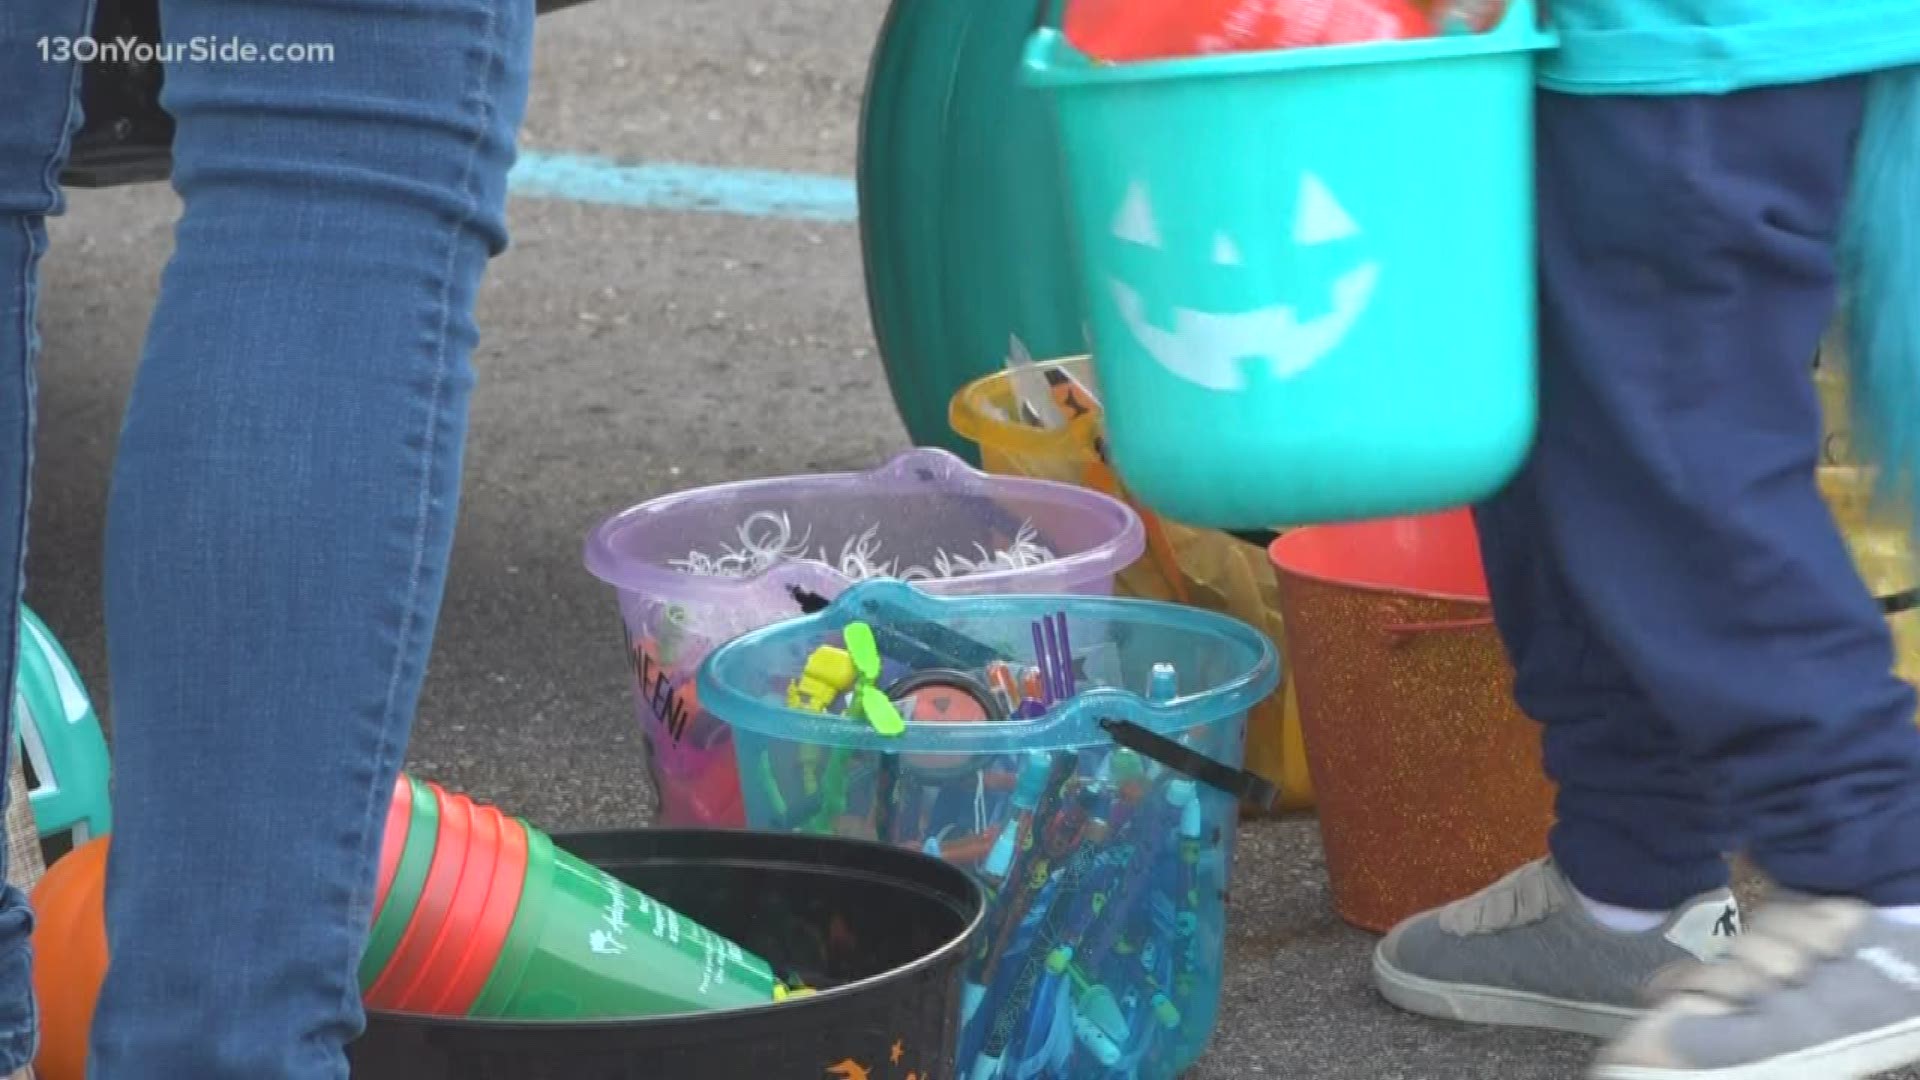 The first annual Teal Pumpkin Trunk or Treat supports the Teal Pumpkin Project, which raises awareness for food allergies during Halloween.